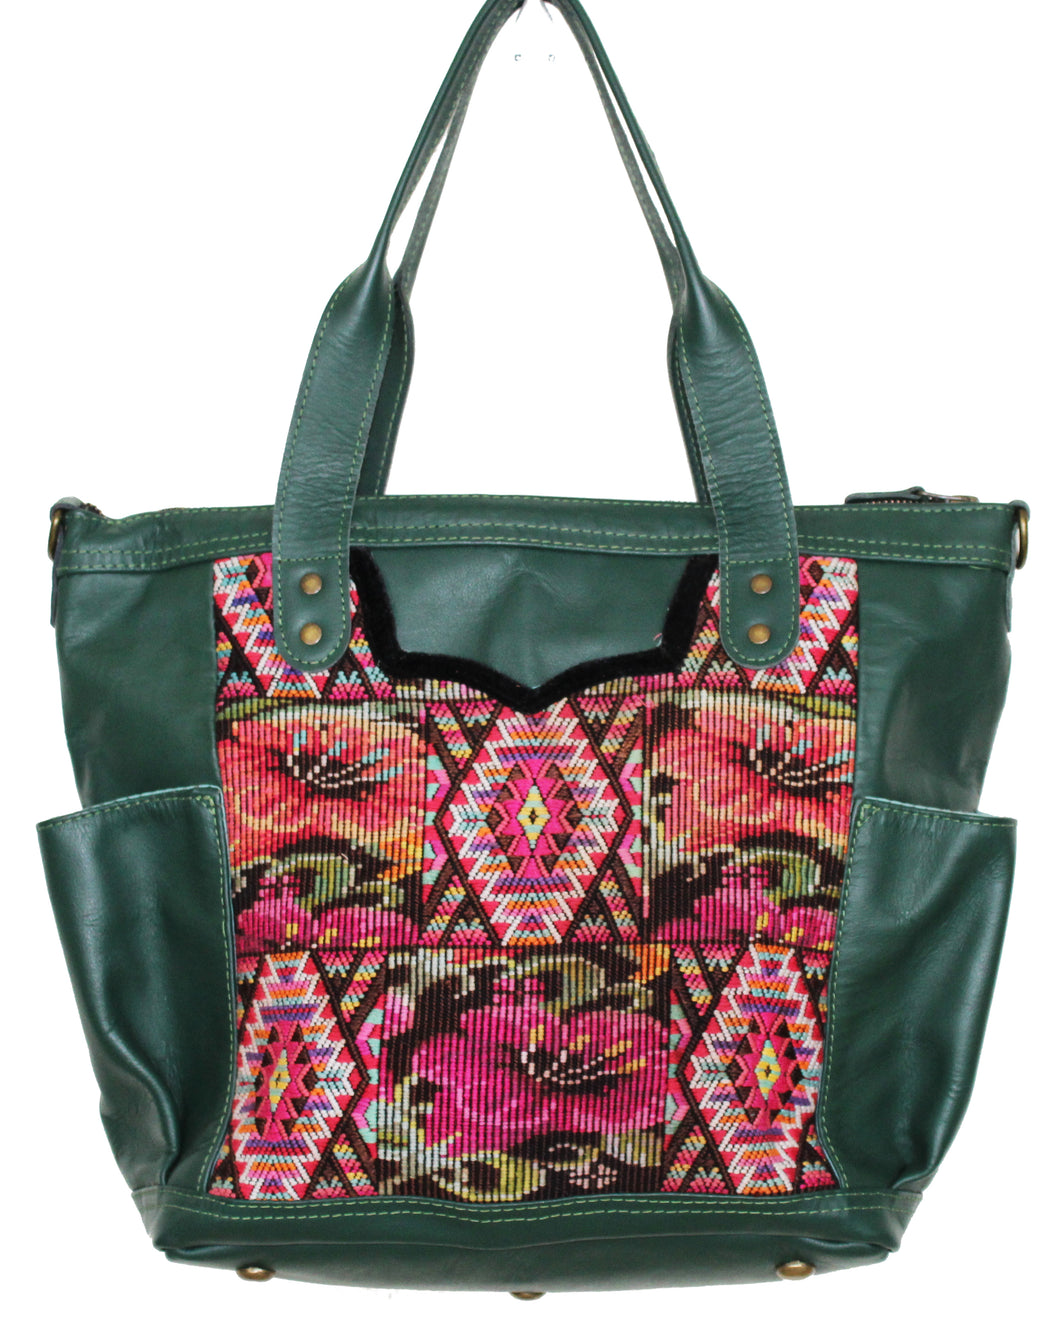 MoonLake Designs Elena medium convertible day bag in dark green leather with eye catching geometric and floral handwoven huipil